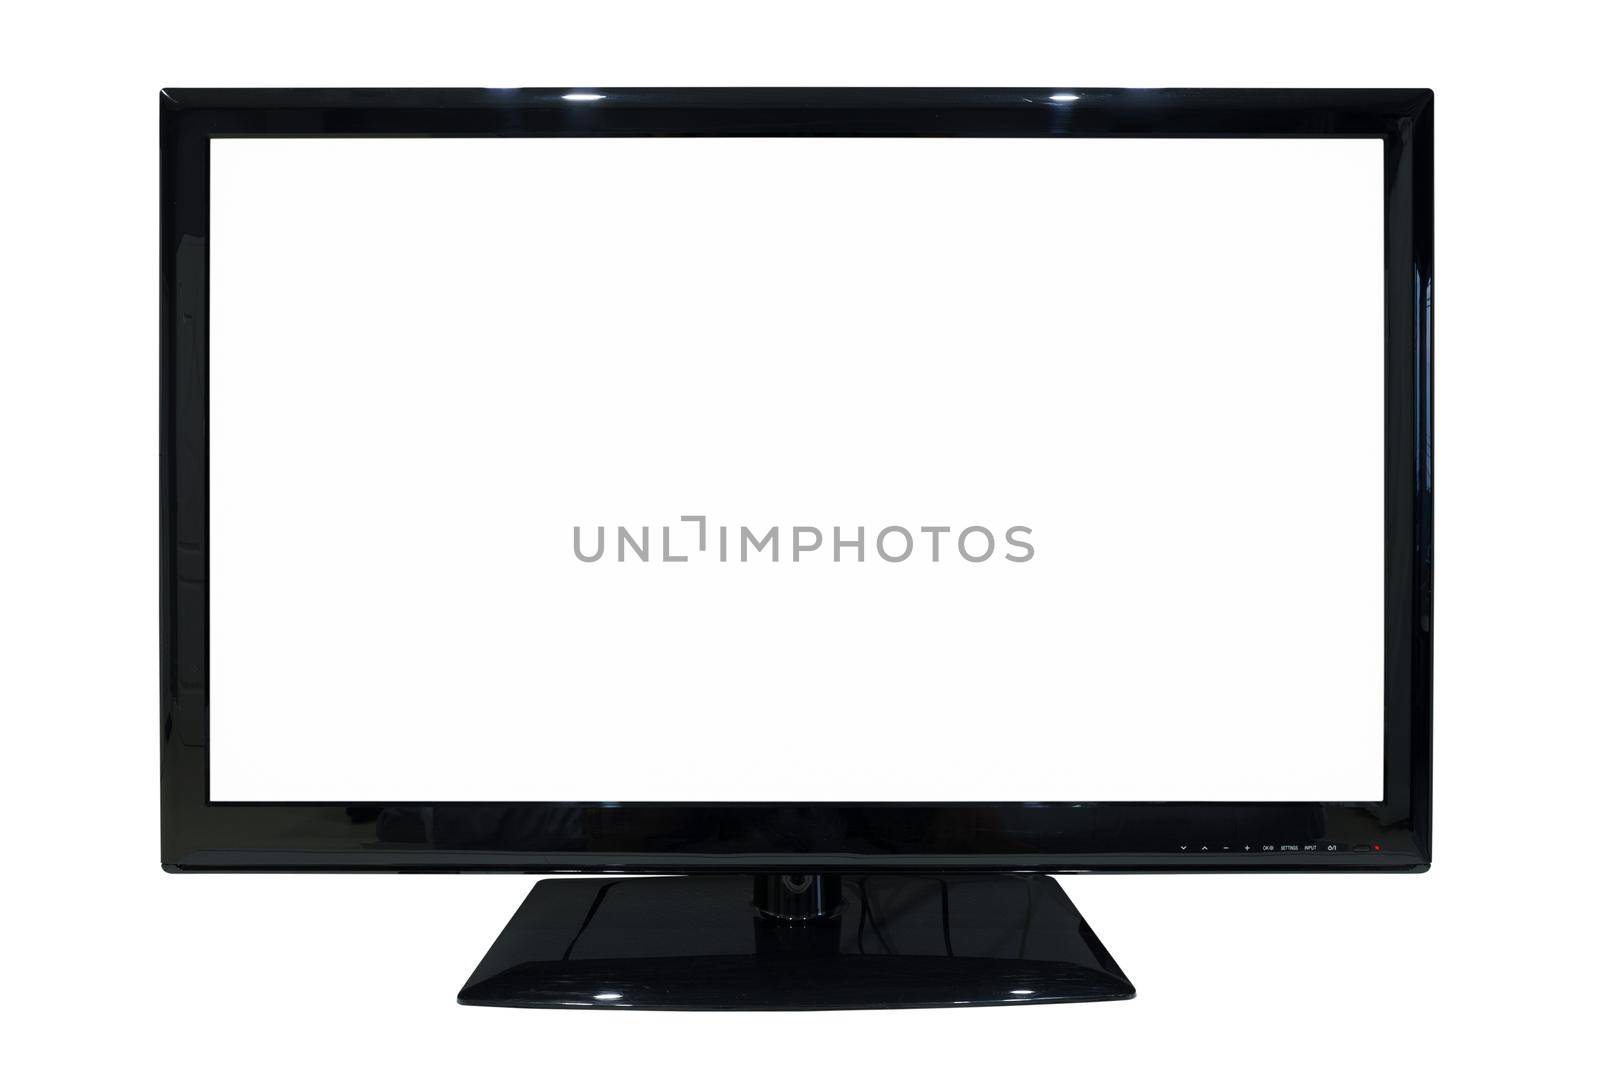 LED TV isolated on white background (with clipping path) by geargodz